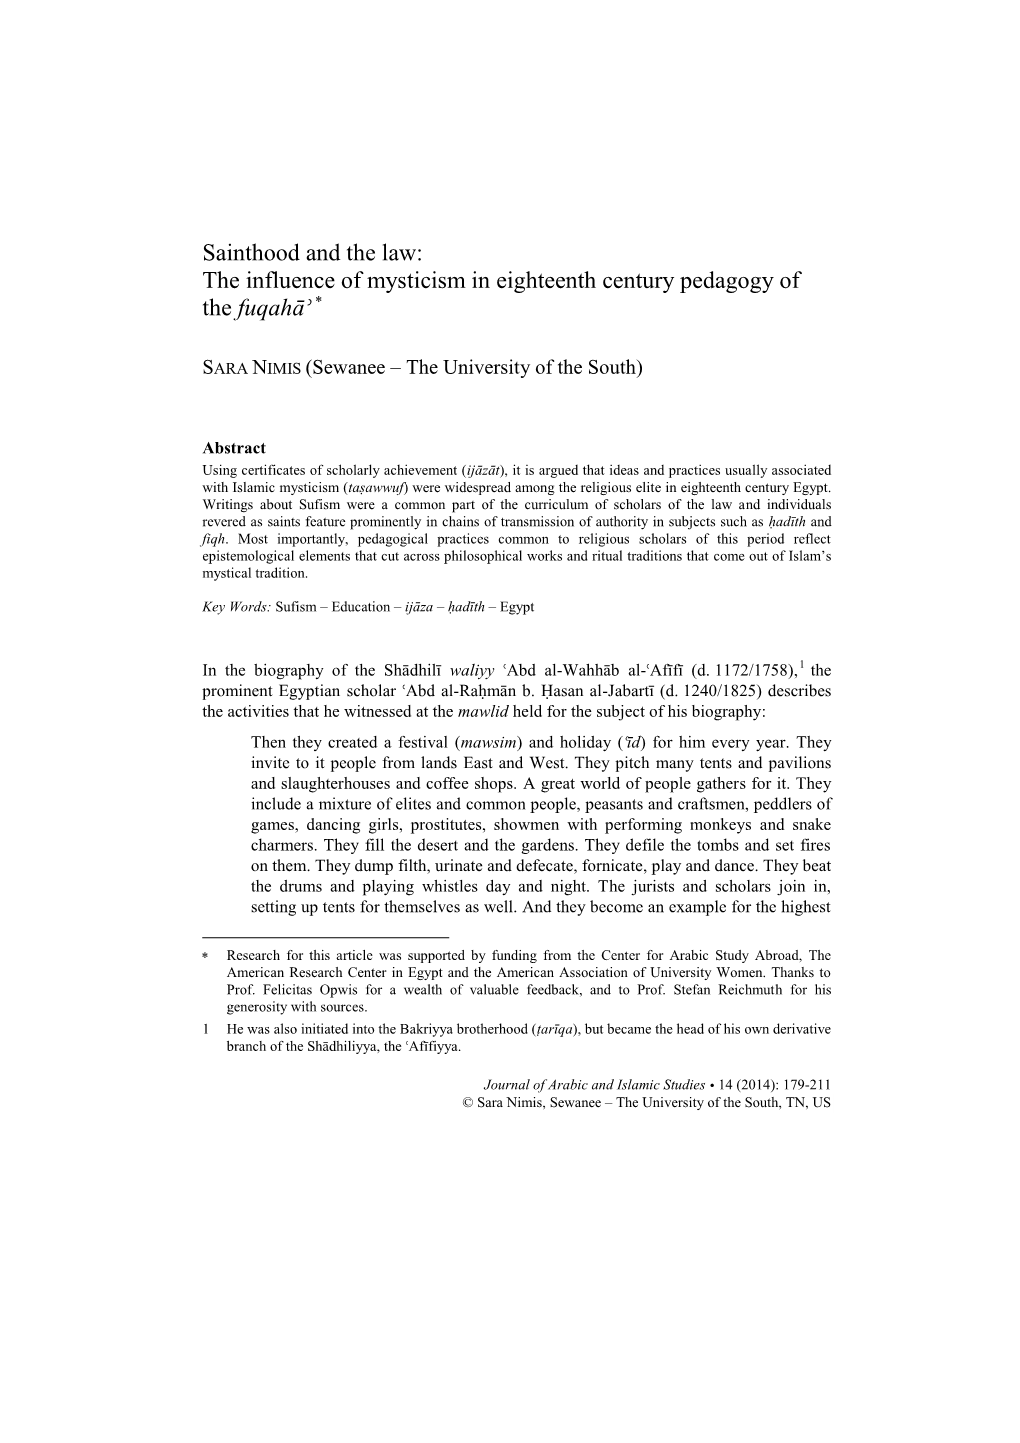 Sainthood and the Law: the Influence of Mysticism in Eighteenth Century Pedagogy of the Fuqahāʾ 